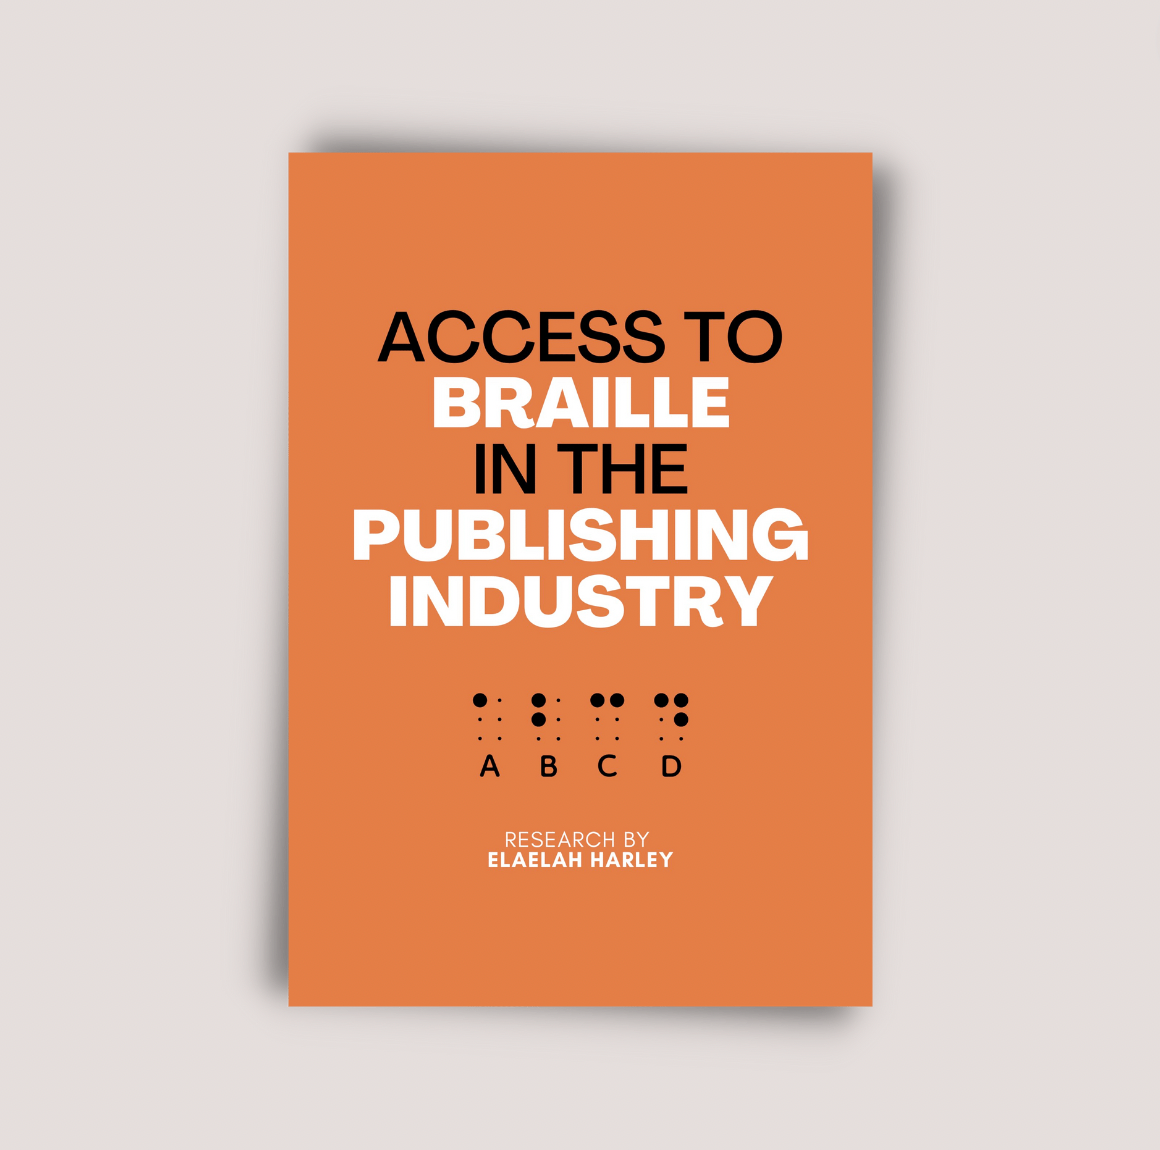 Access to Braille in the Publishing Industry